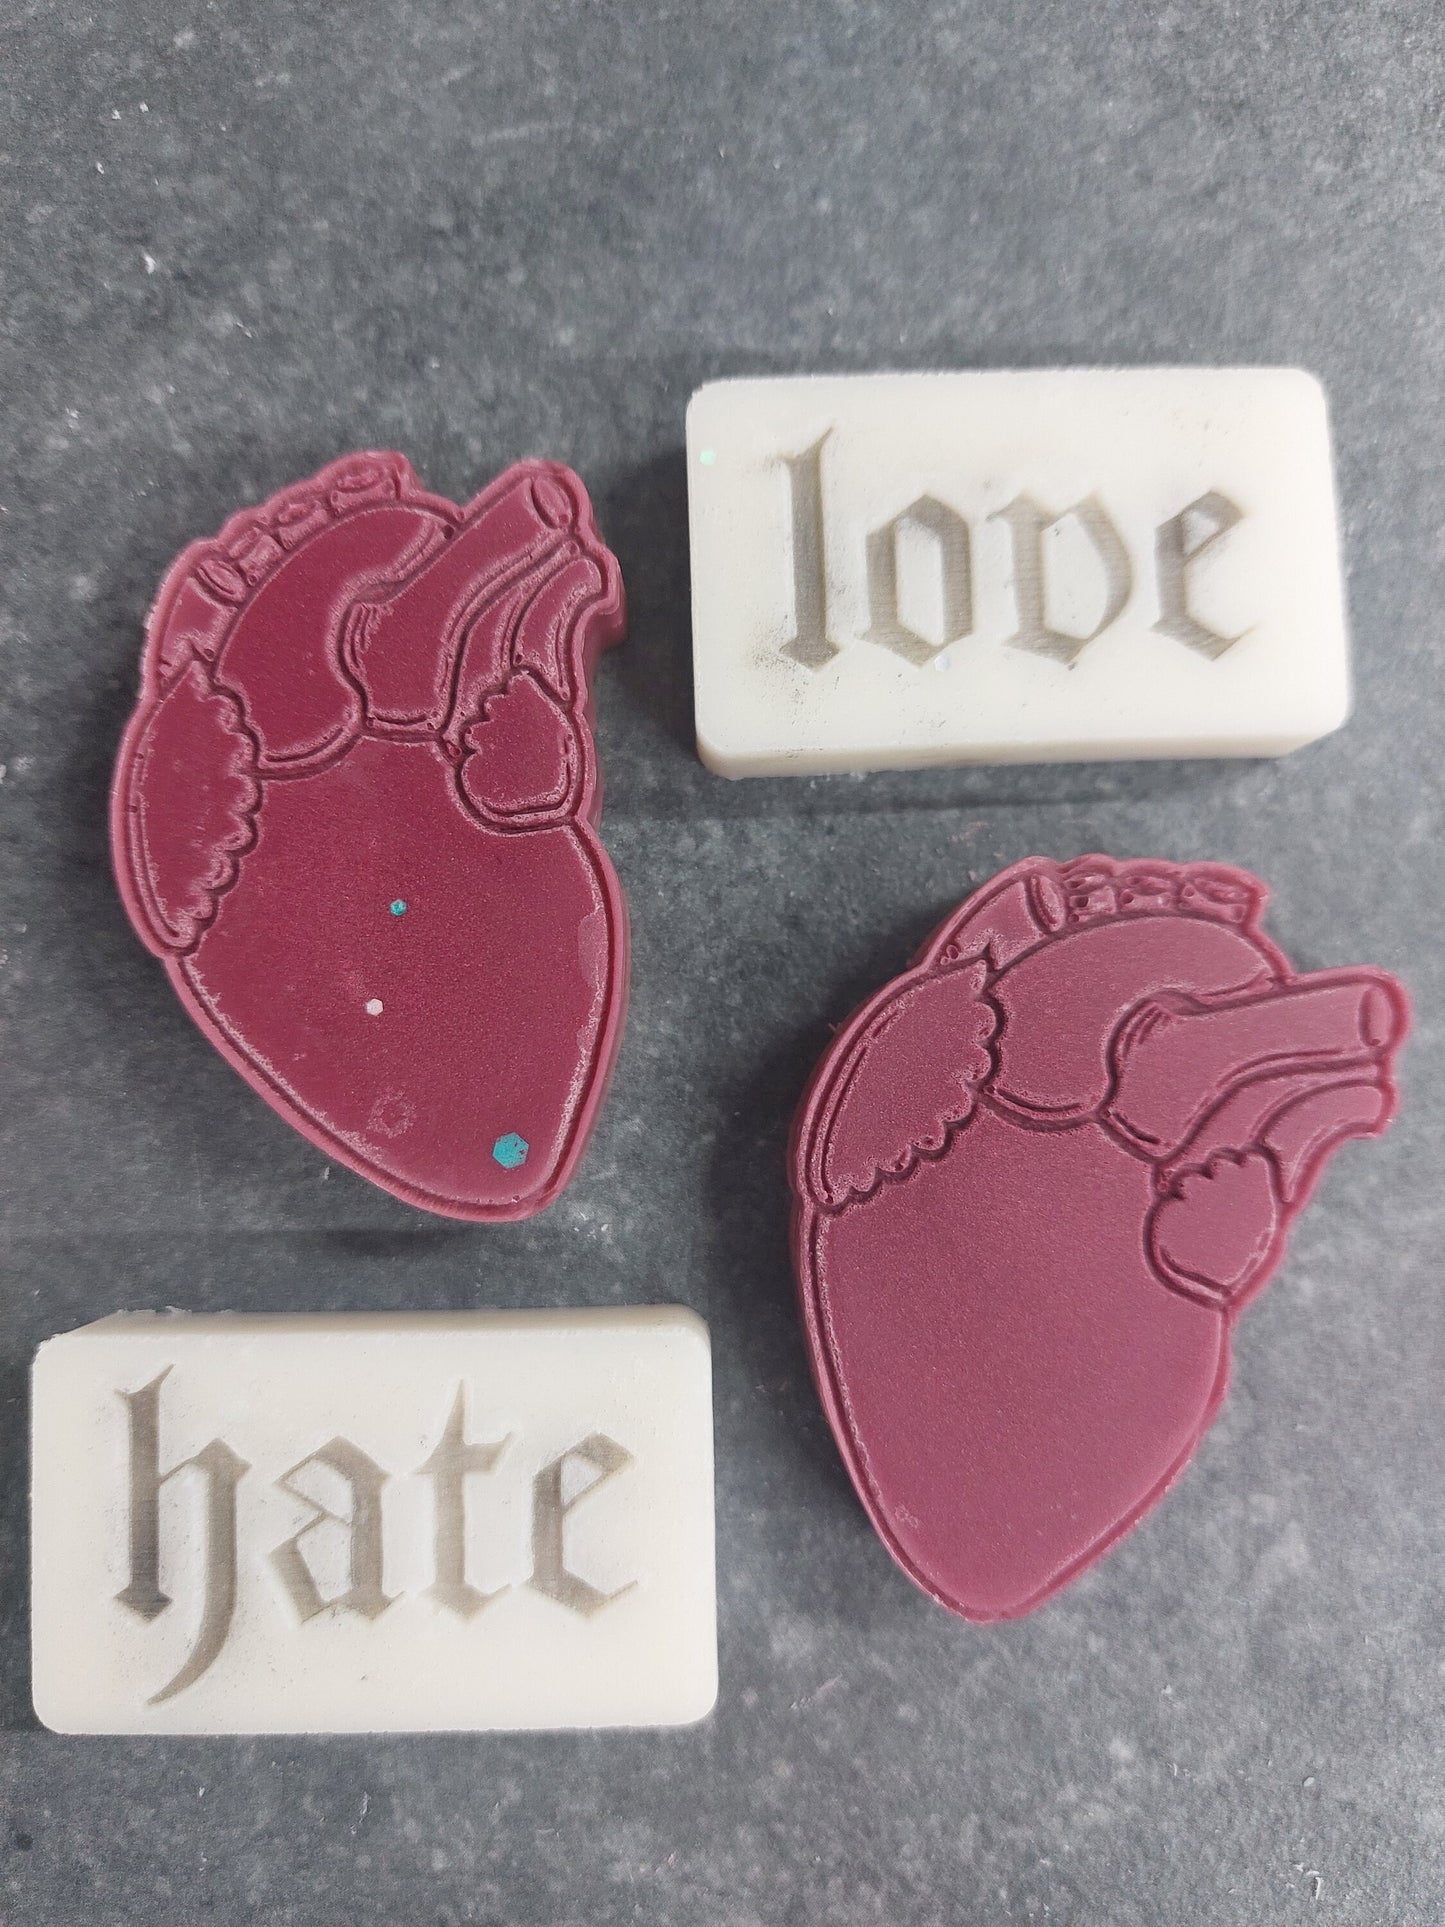 Love Hate 8 Cell Silicone Mould for wax, resin, soap